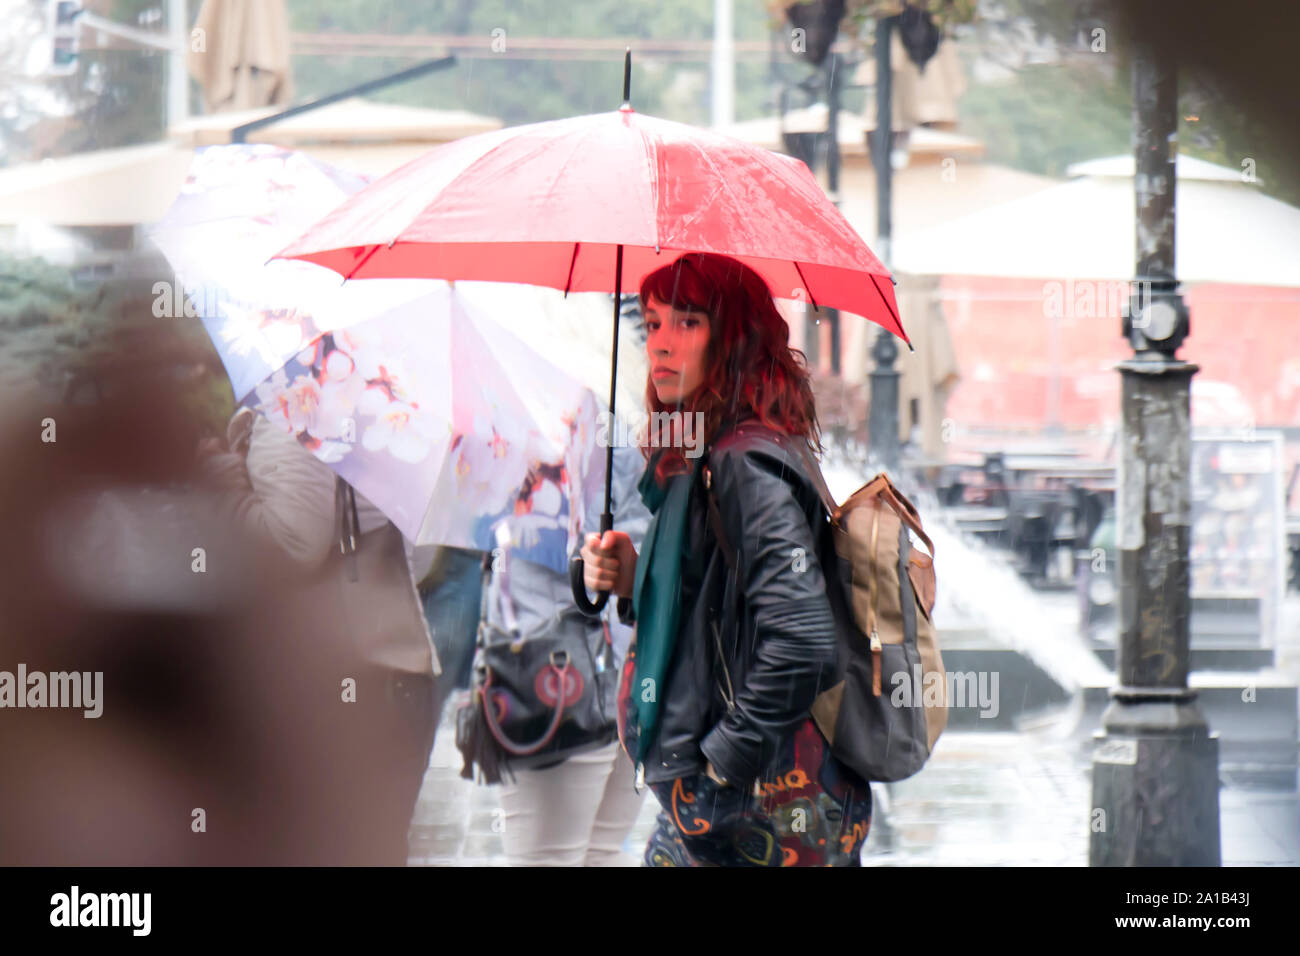 Belgrade, Serbia- September 24, 2018: Blurry young woman walking under the red umbrella on rainy and crowd city street Stock Photo